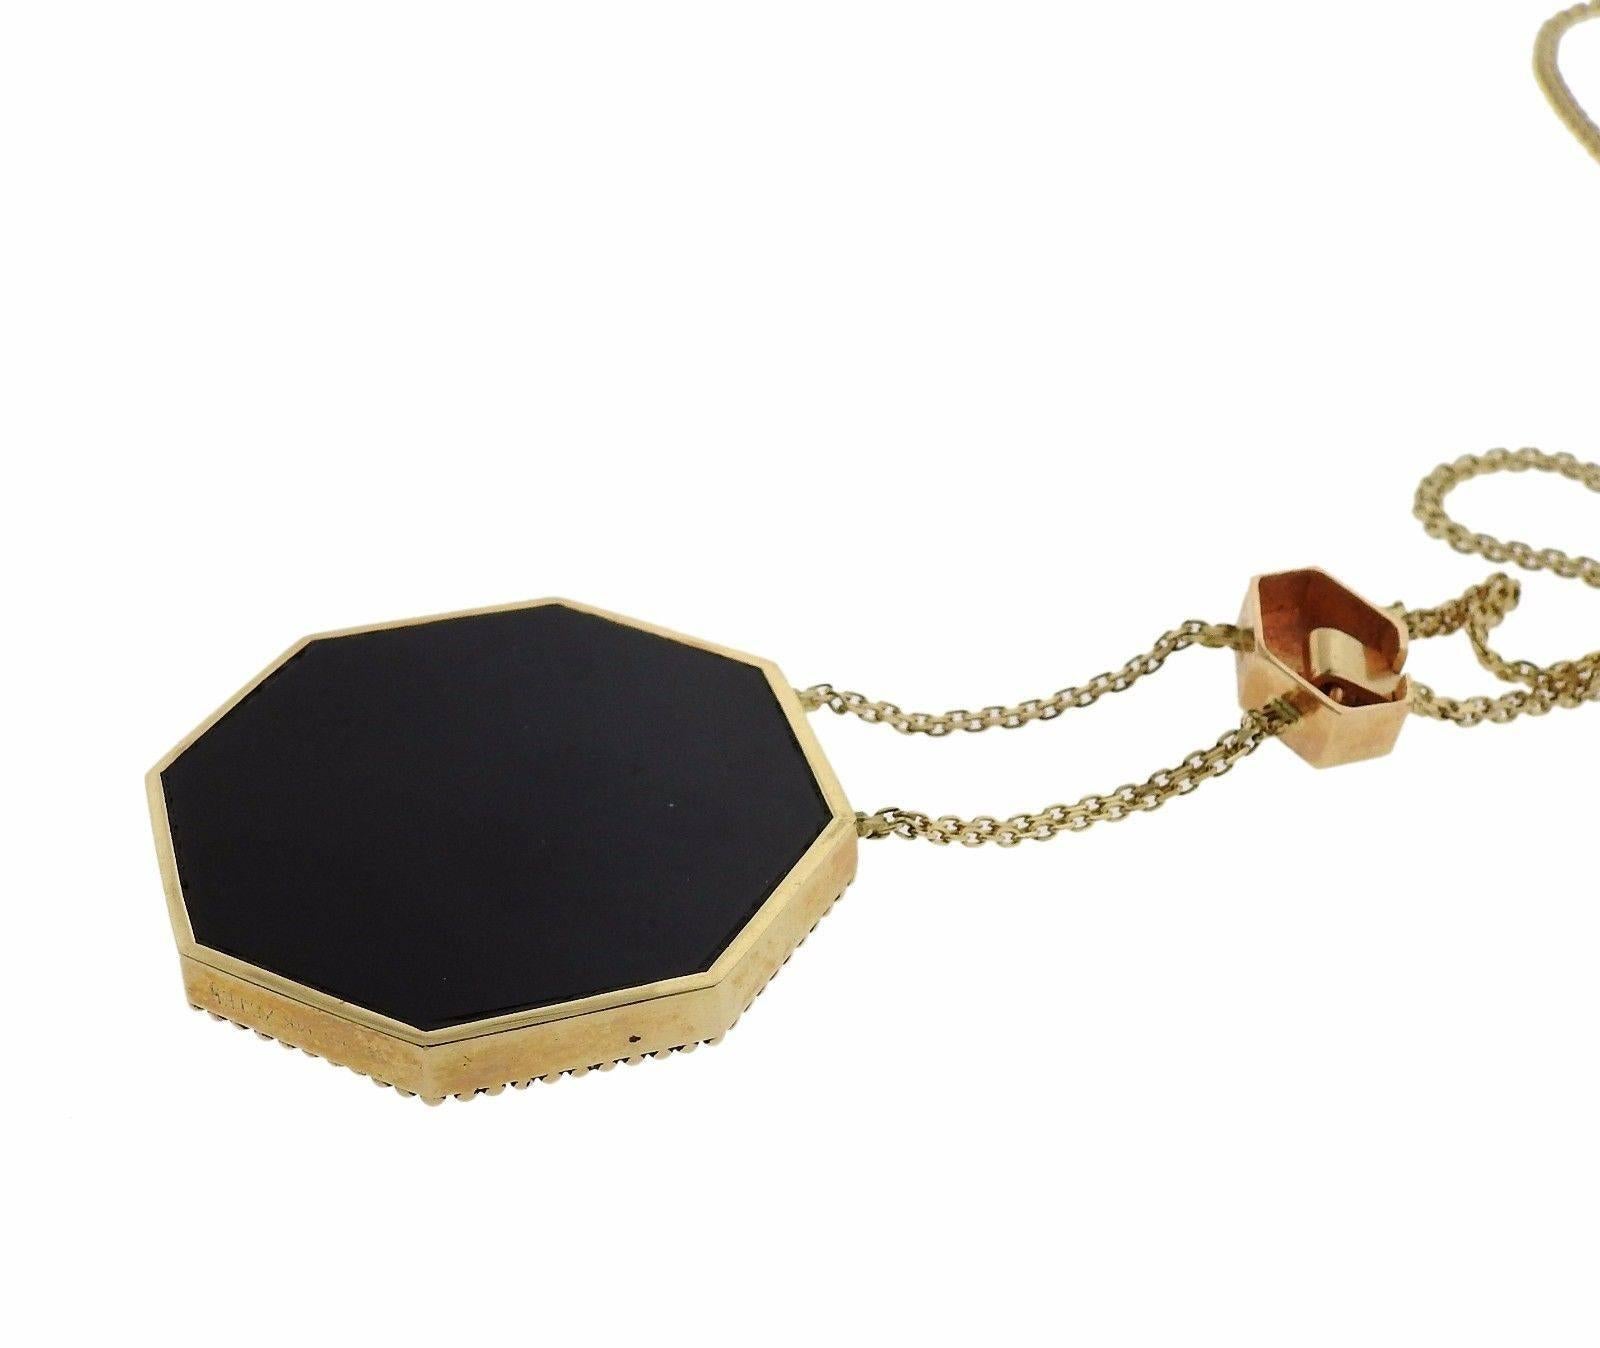 A 14k gold and sterling silver necklace set with onyx, mother of pearl, ruby and approximately approximately 0.05ctw of H/VS-SI diamonds.  The necklace is 16 3/4" long, pendant drop is 3" long, pendant measures 40mm x 40mm.  The necklace